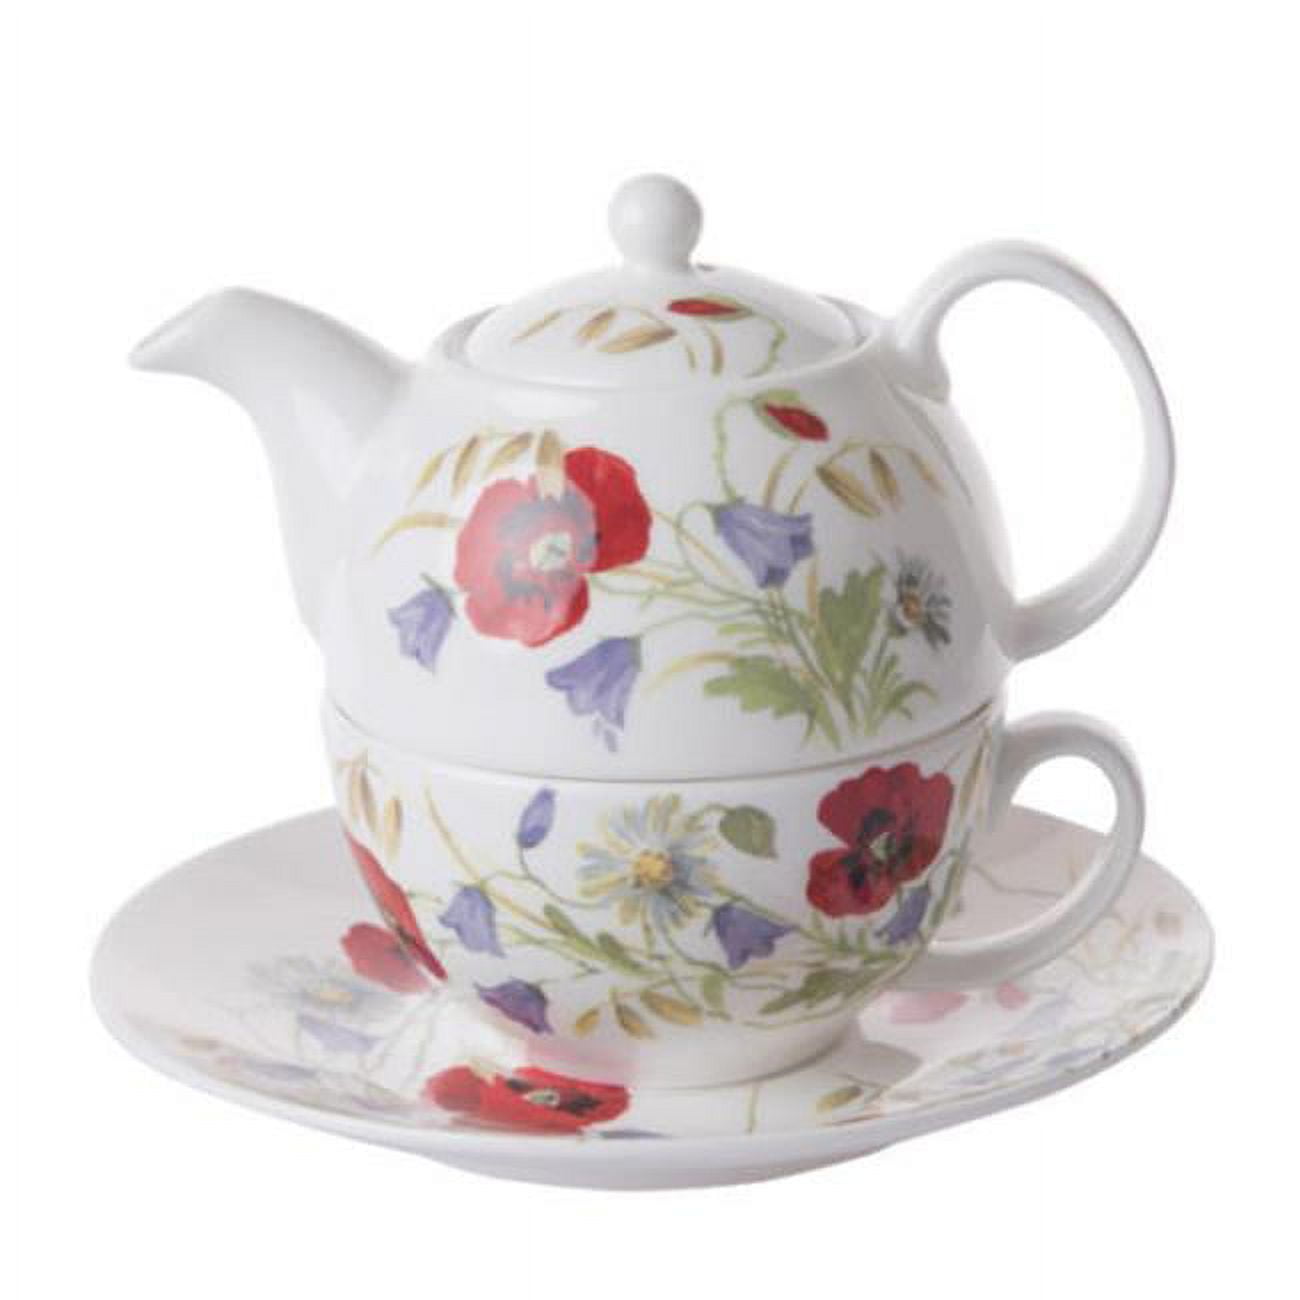 Er3008 90 Mm English Meadow Tea For One Teapot With Tea Cup & Saucer, Multi Color